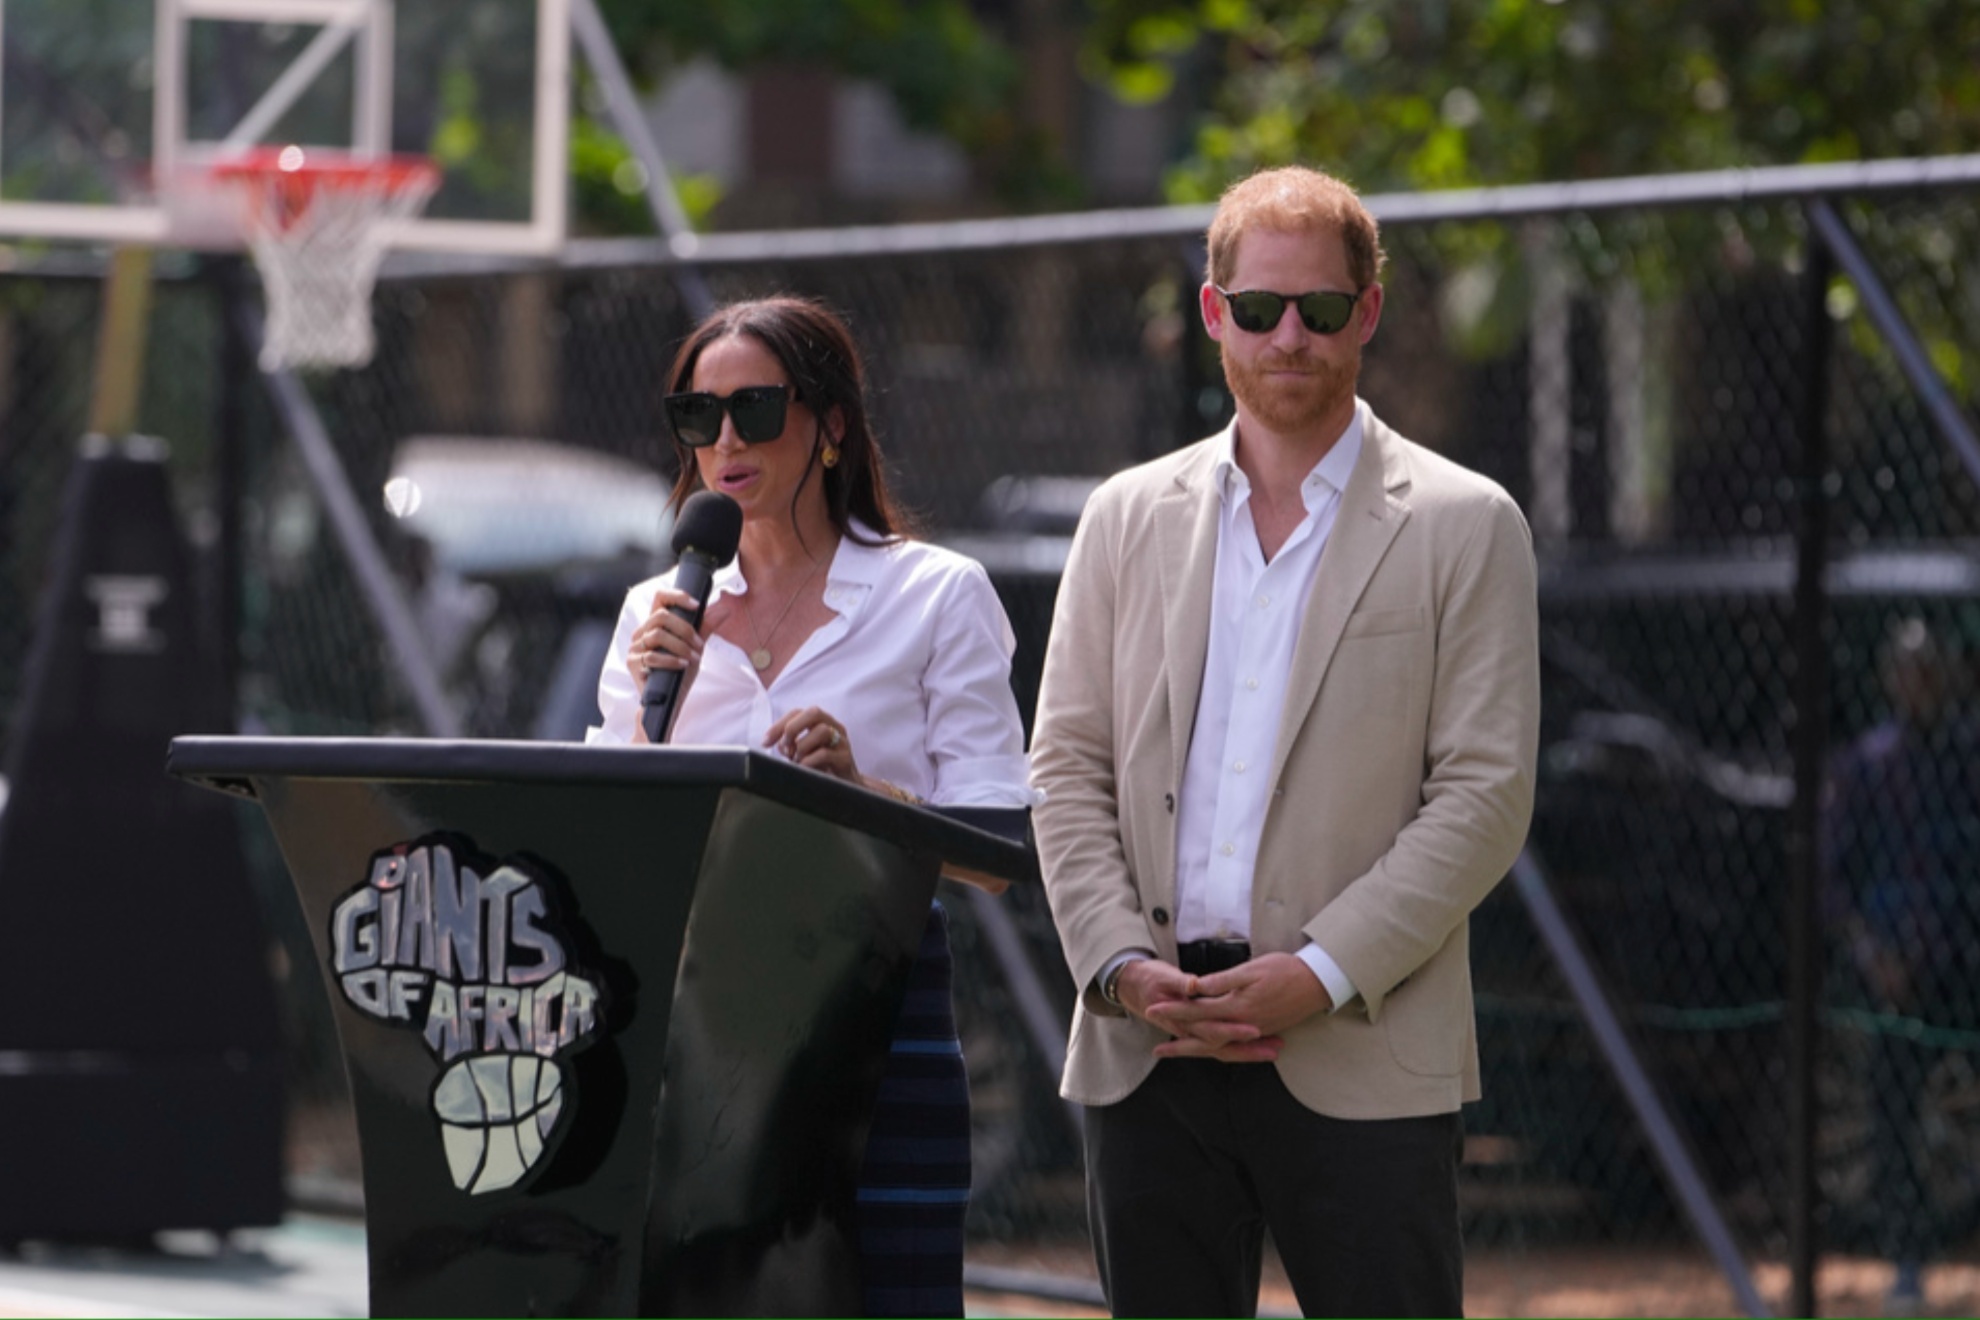 Meghan Markle speaks next to Prince Harry durin a Basketball clinic in Nigeria.